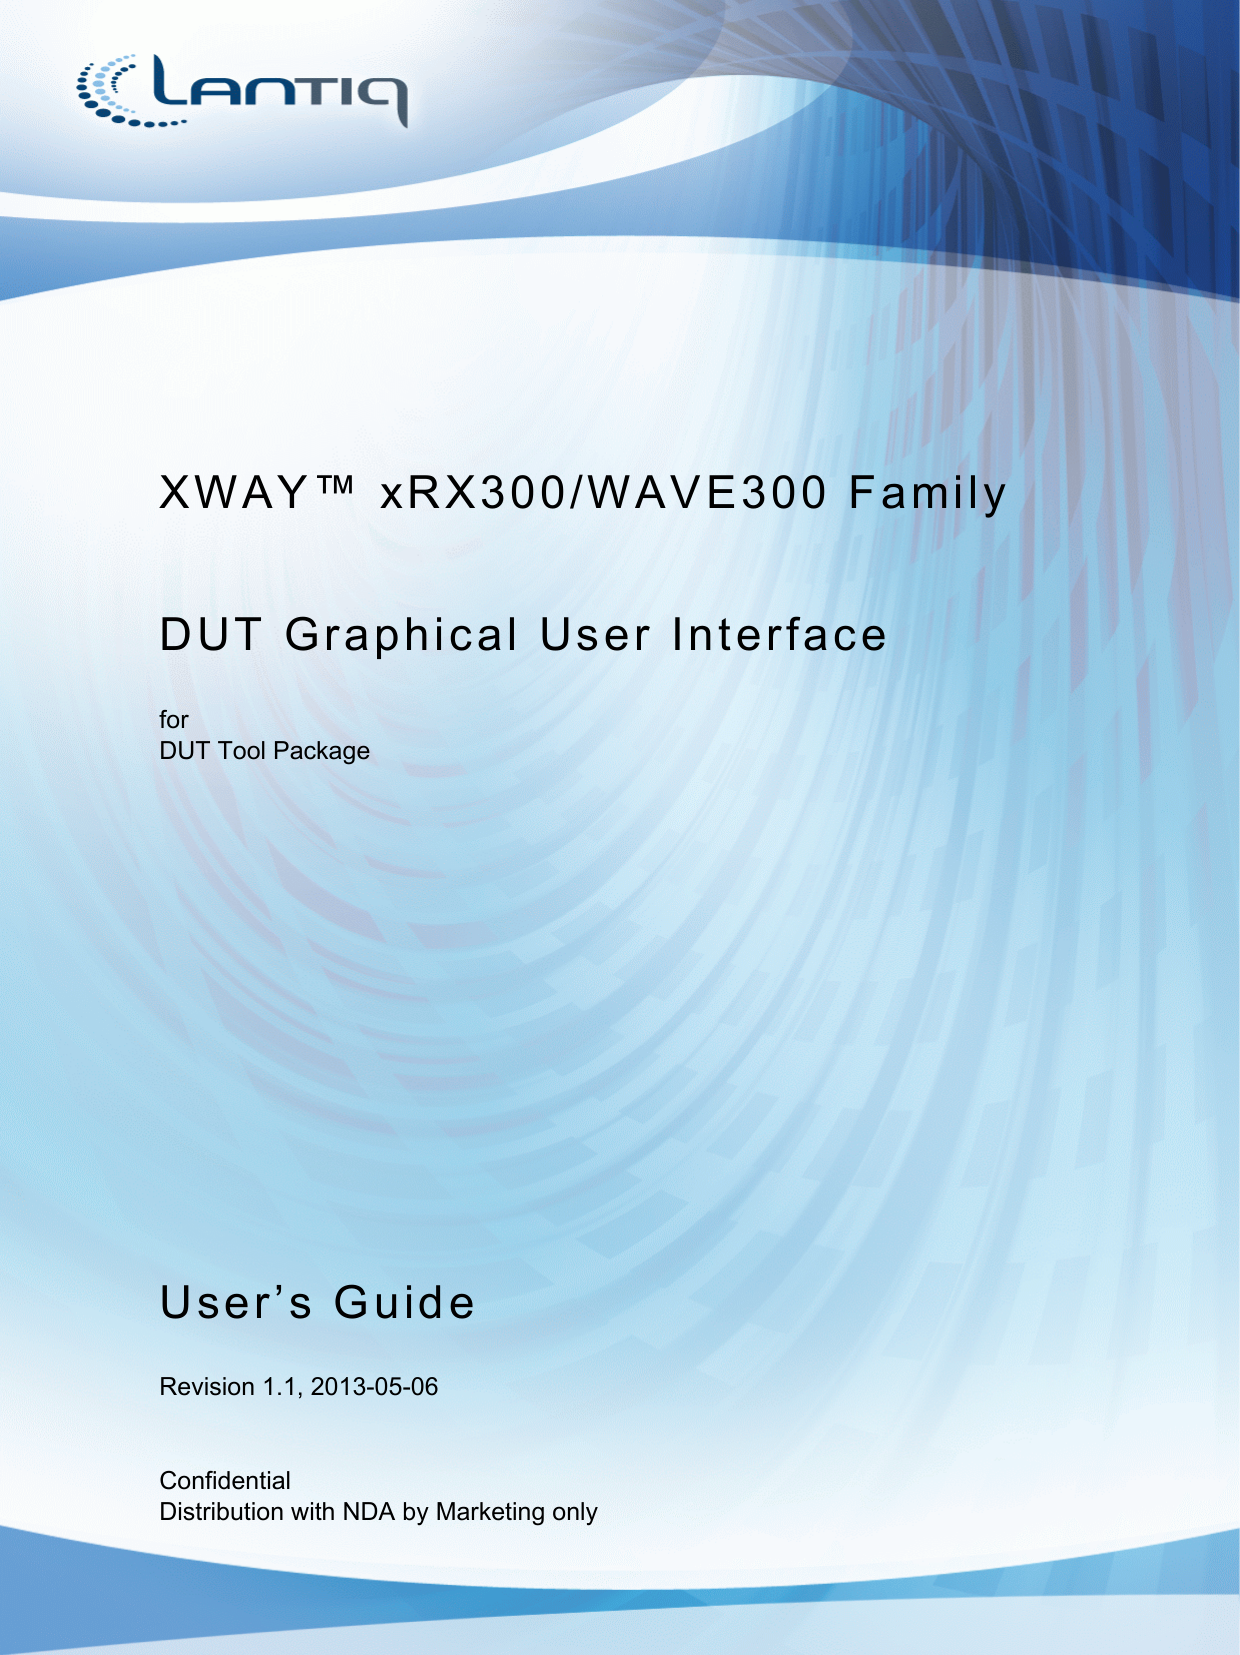 User’s Guide      Revision 1.1, 2013-05-06 ConfidentialDistribution with NDA by Marketing onlyDUT Graphical User InterfaceforDUT Tool PackageXWAY™ xRX300/WAVE300 Family      